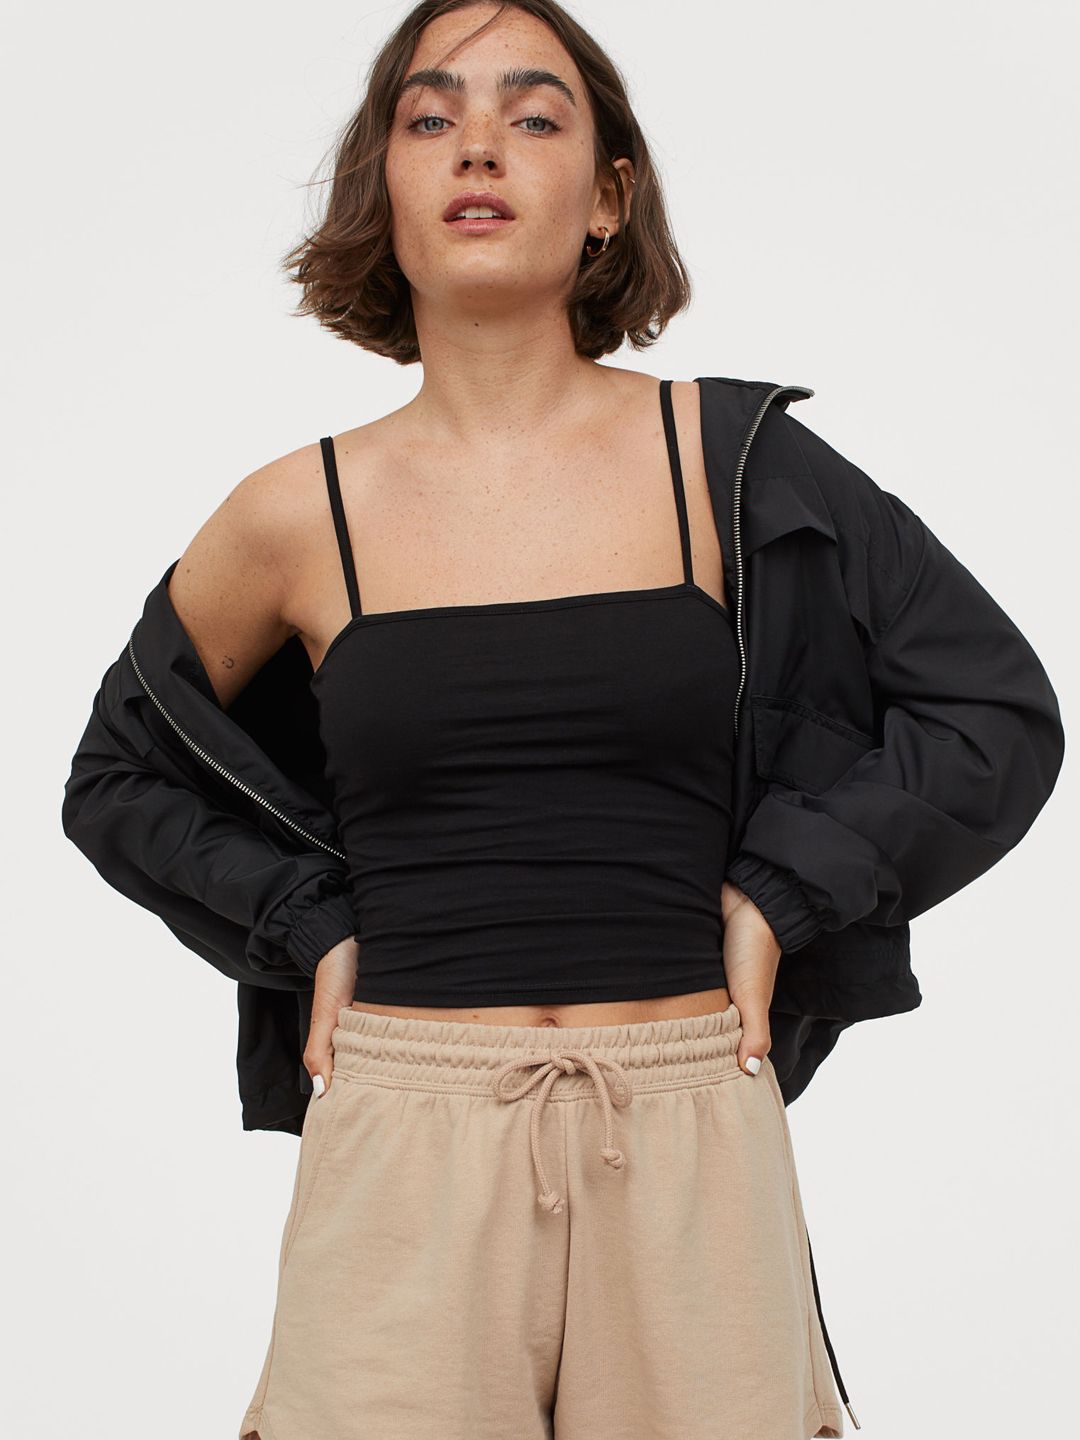 H&M Women Black Solid Cropped Jersey Strappy Top